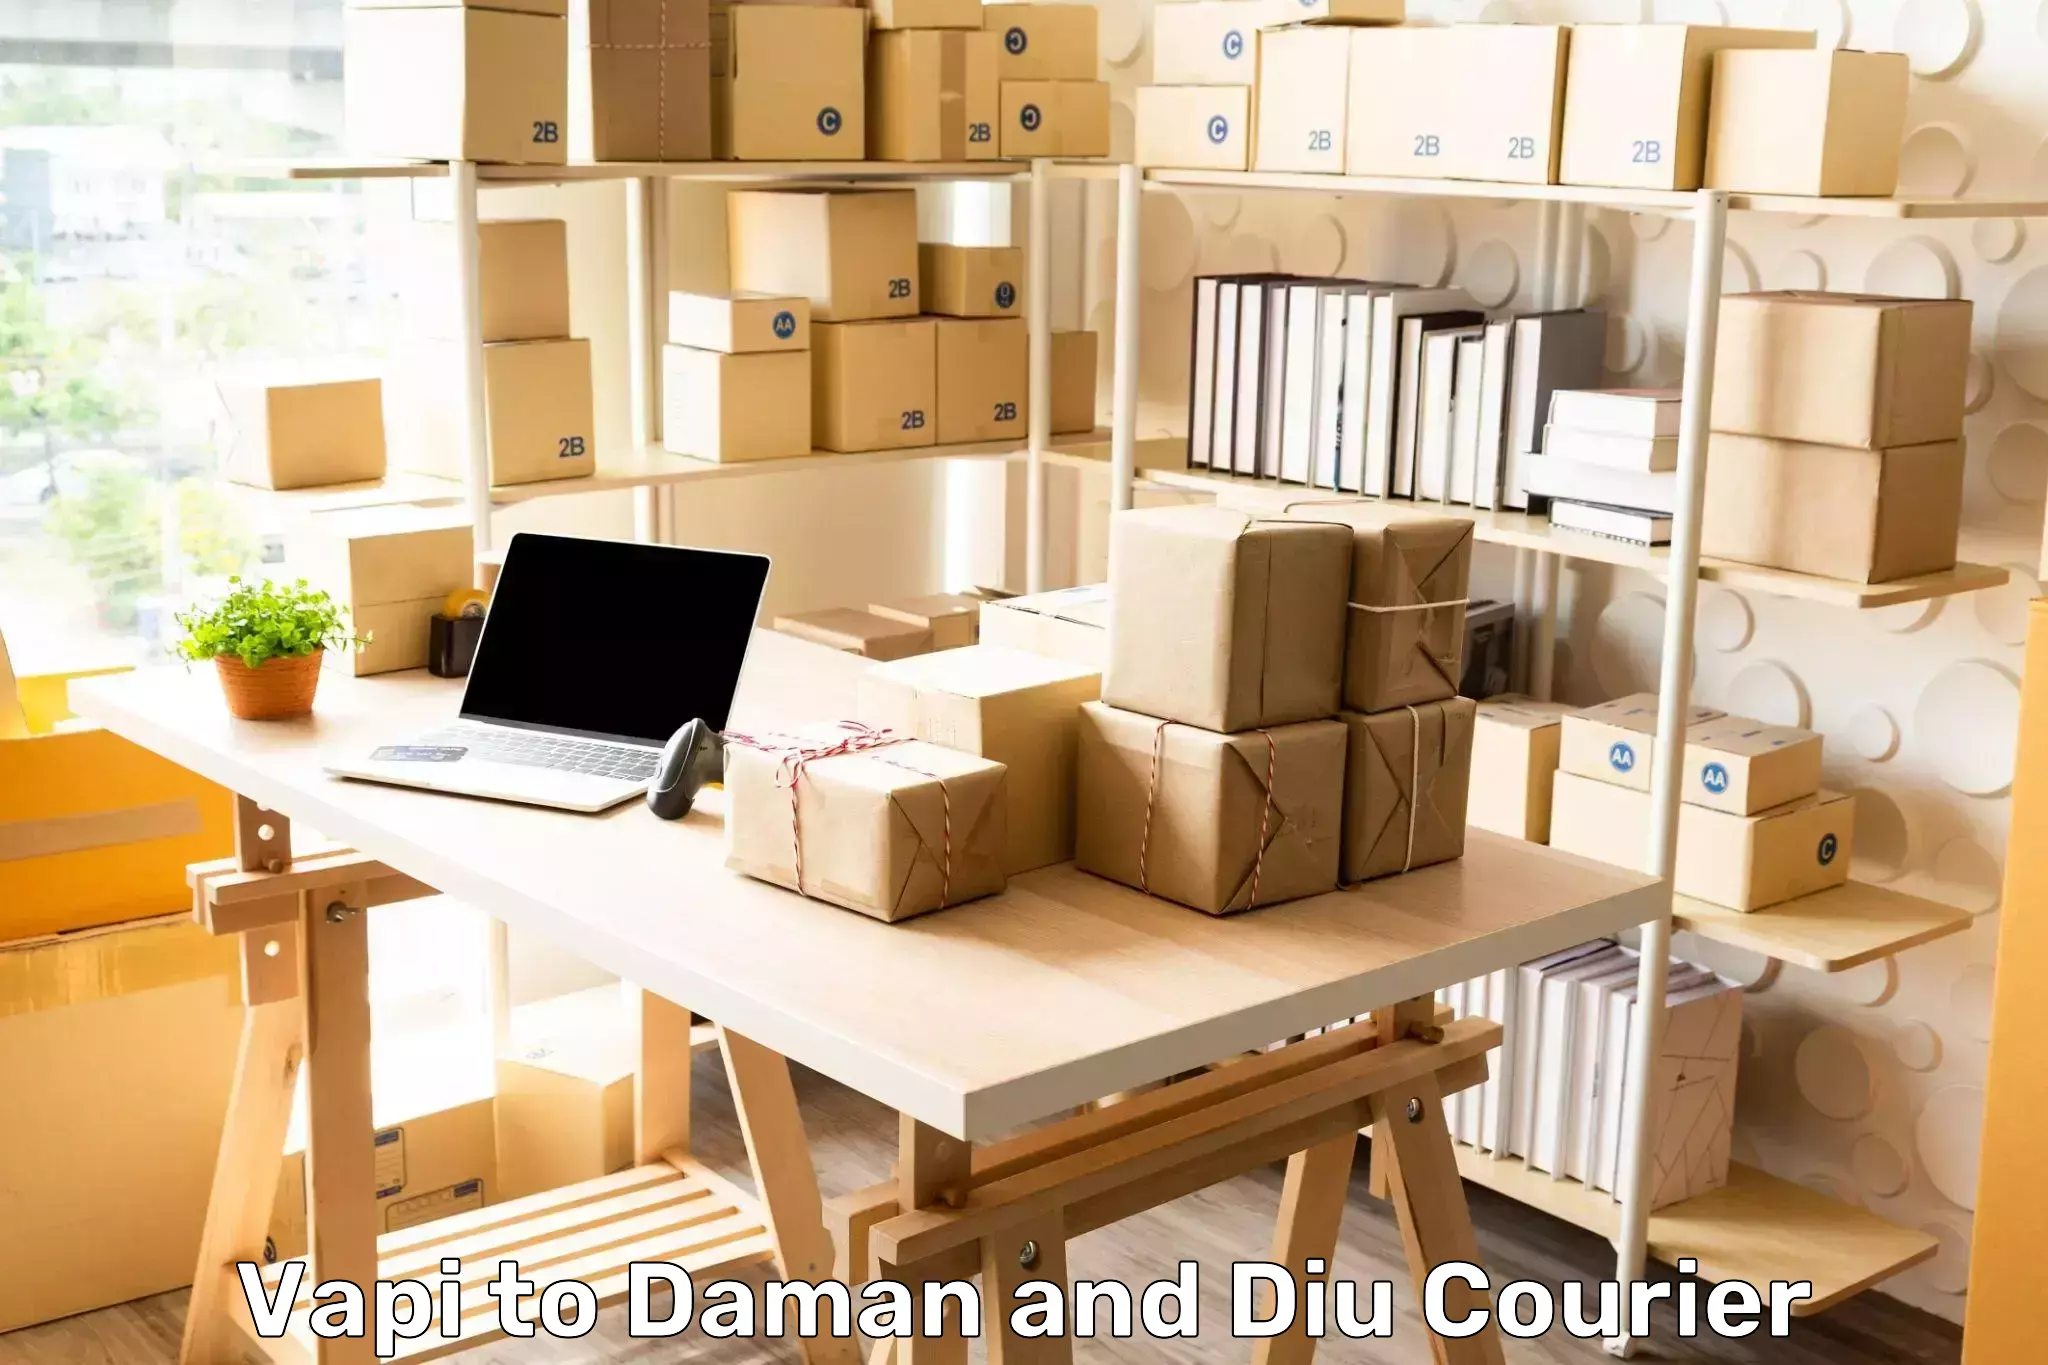 Courier services in Vapi to Daman